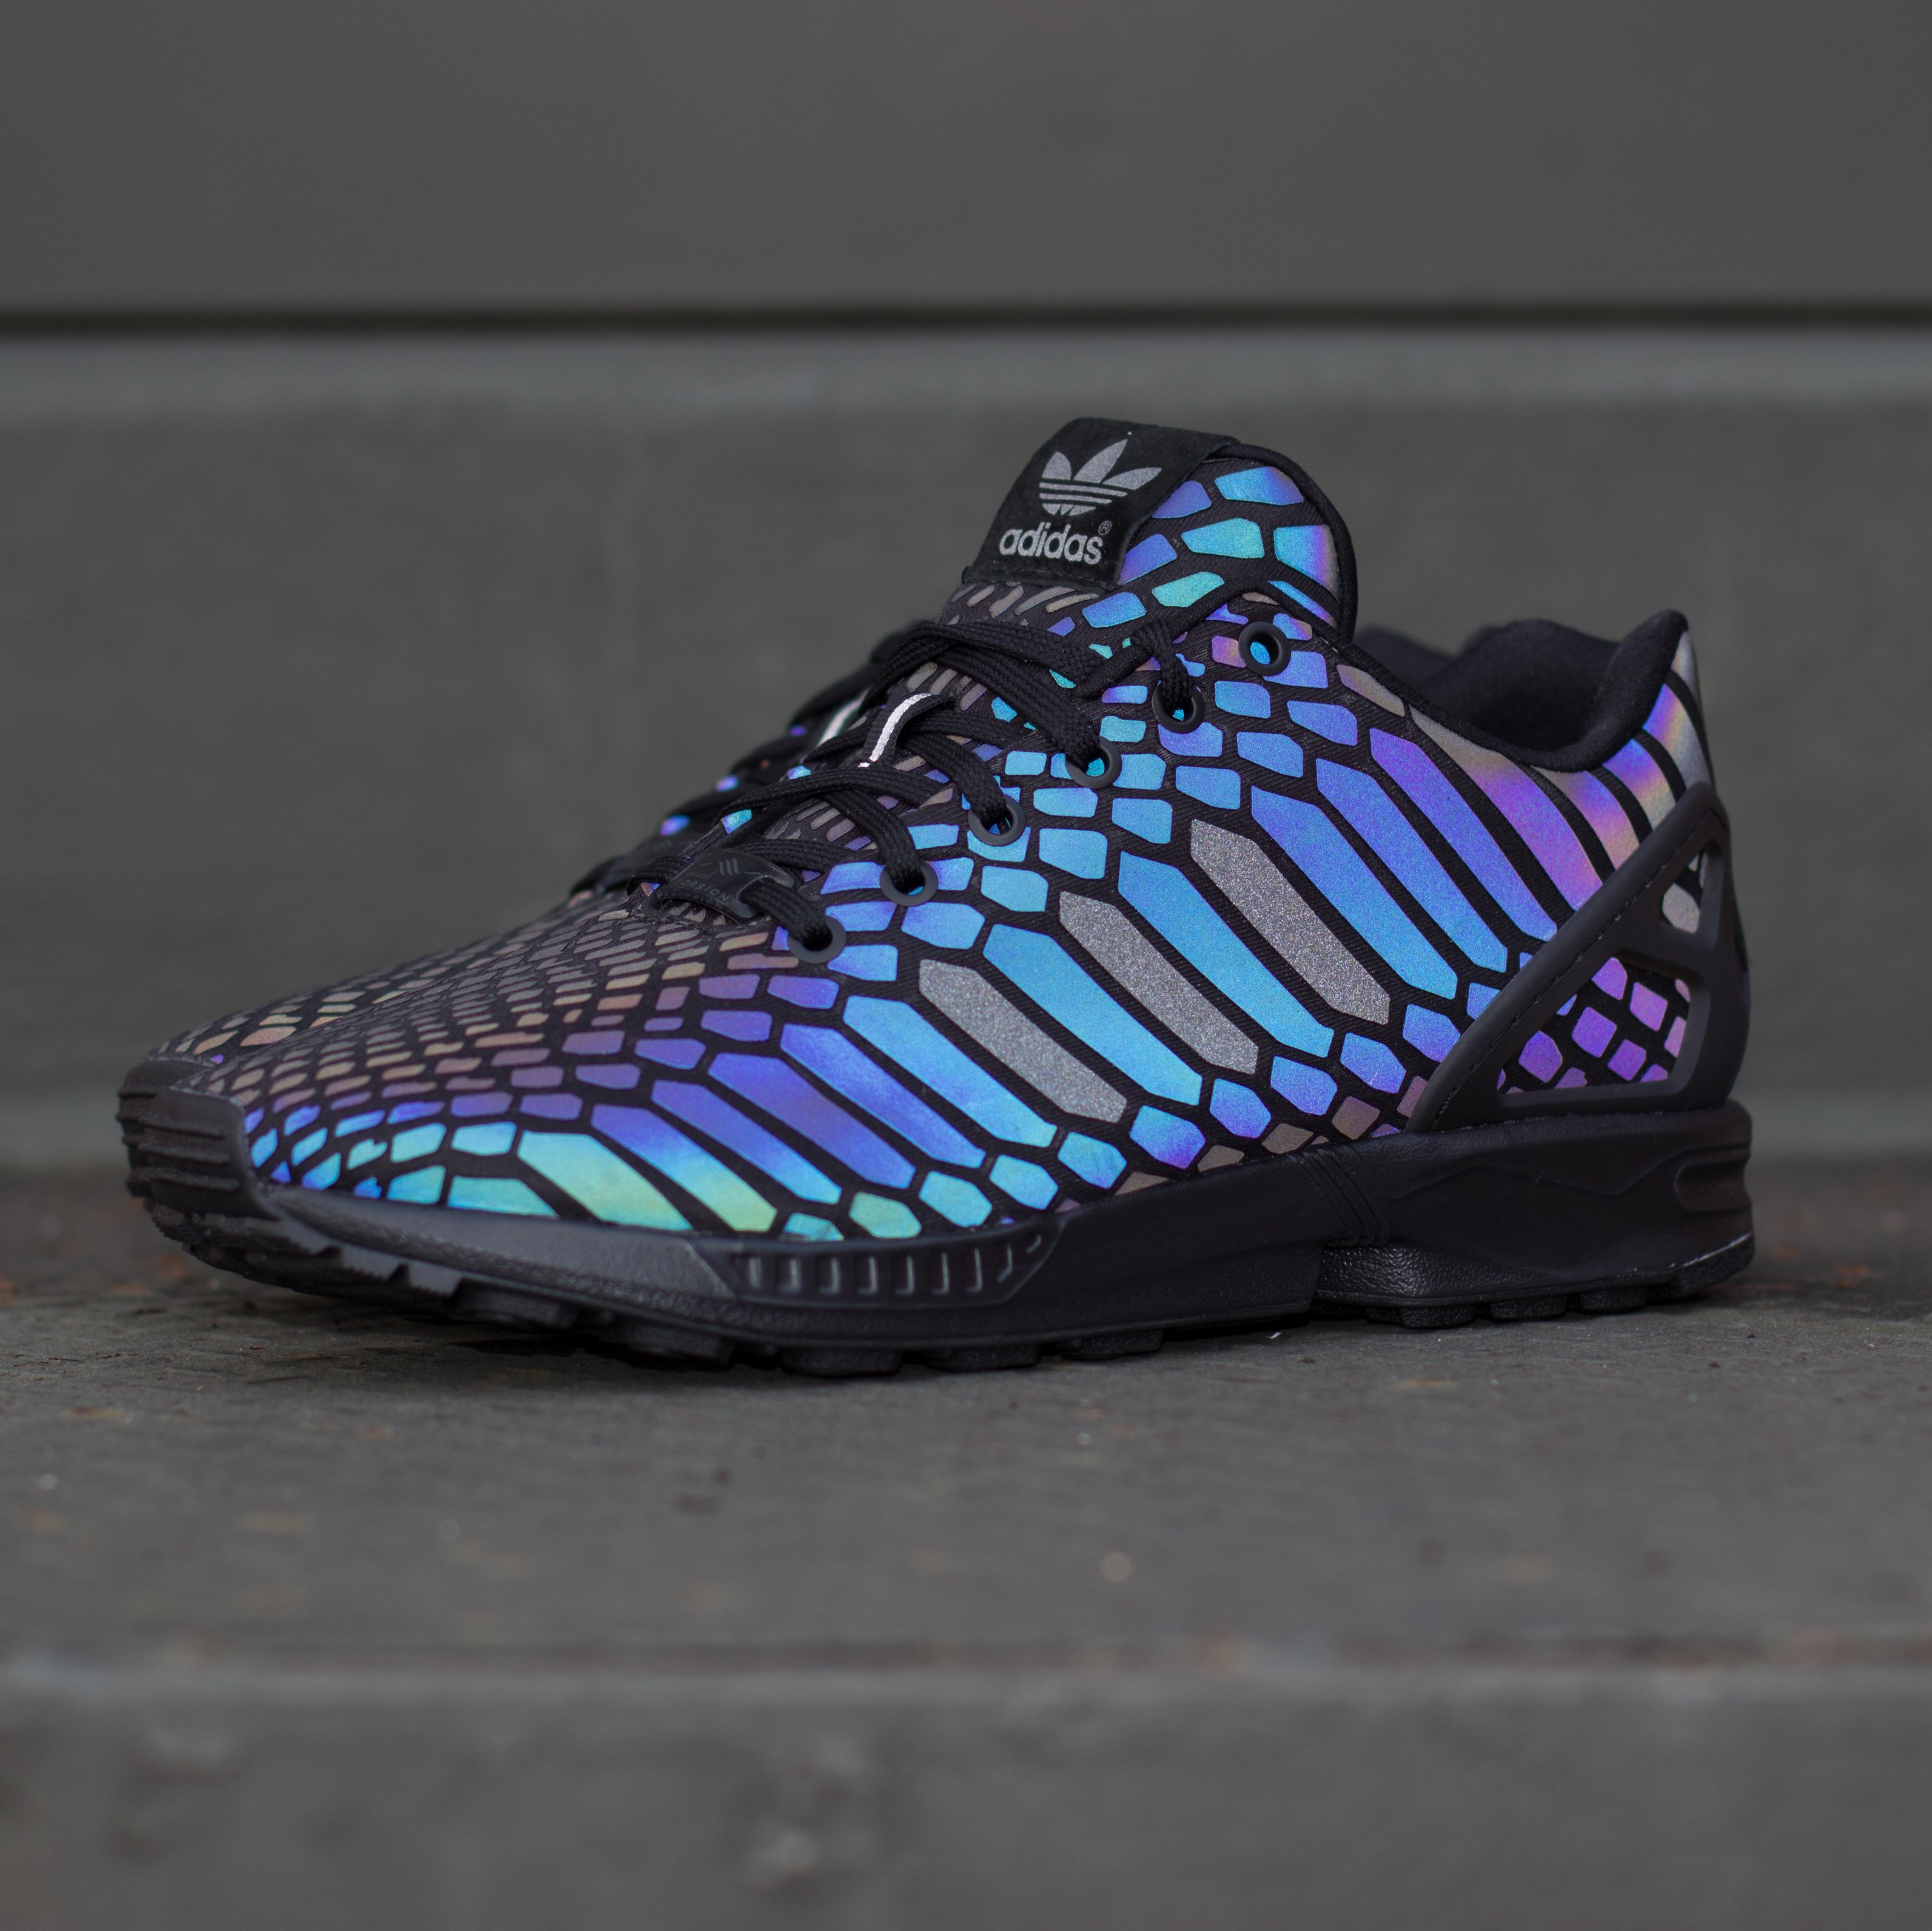 City Gear on X: "#ICYMI The @adidas ZX Flux Xeno QS is out and availalbe  for $120 https://t.co/5HfHXTnayi https://t.co/XRR2kl4NSP" / X